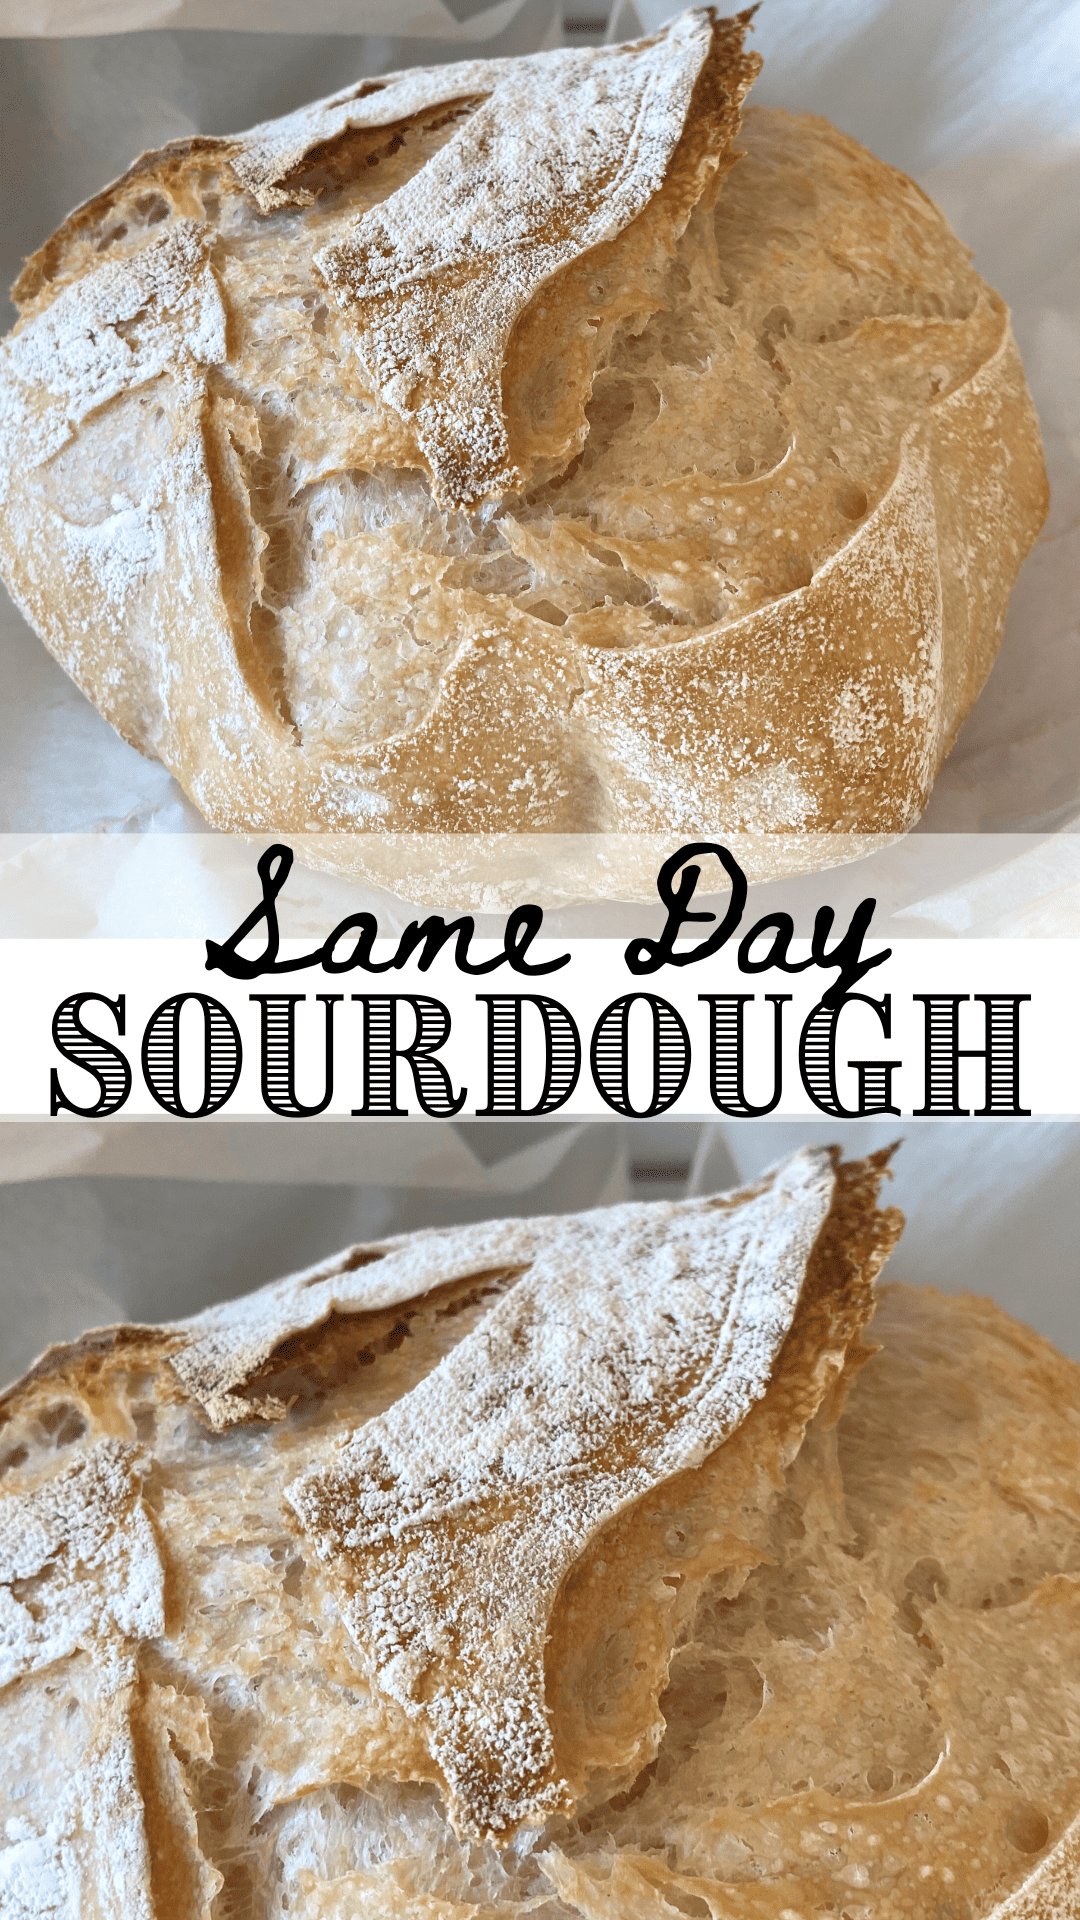 same day sourdough bread recipe with text pin